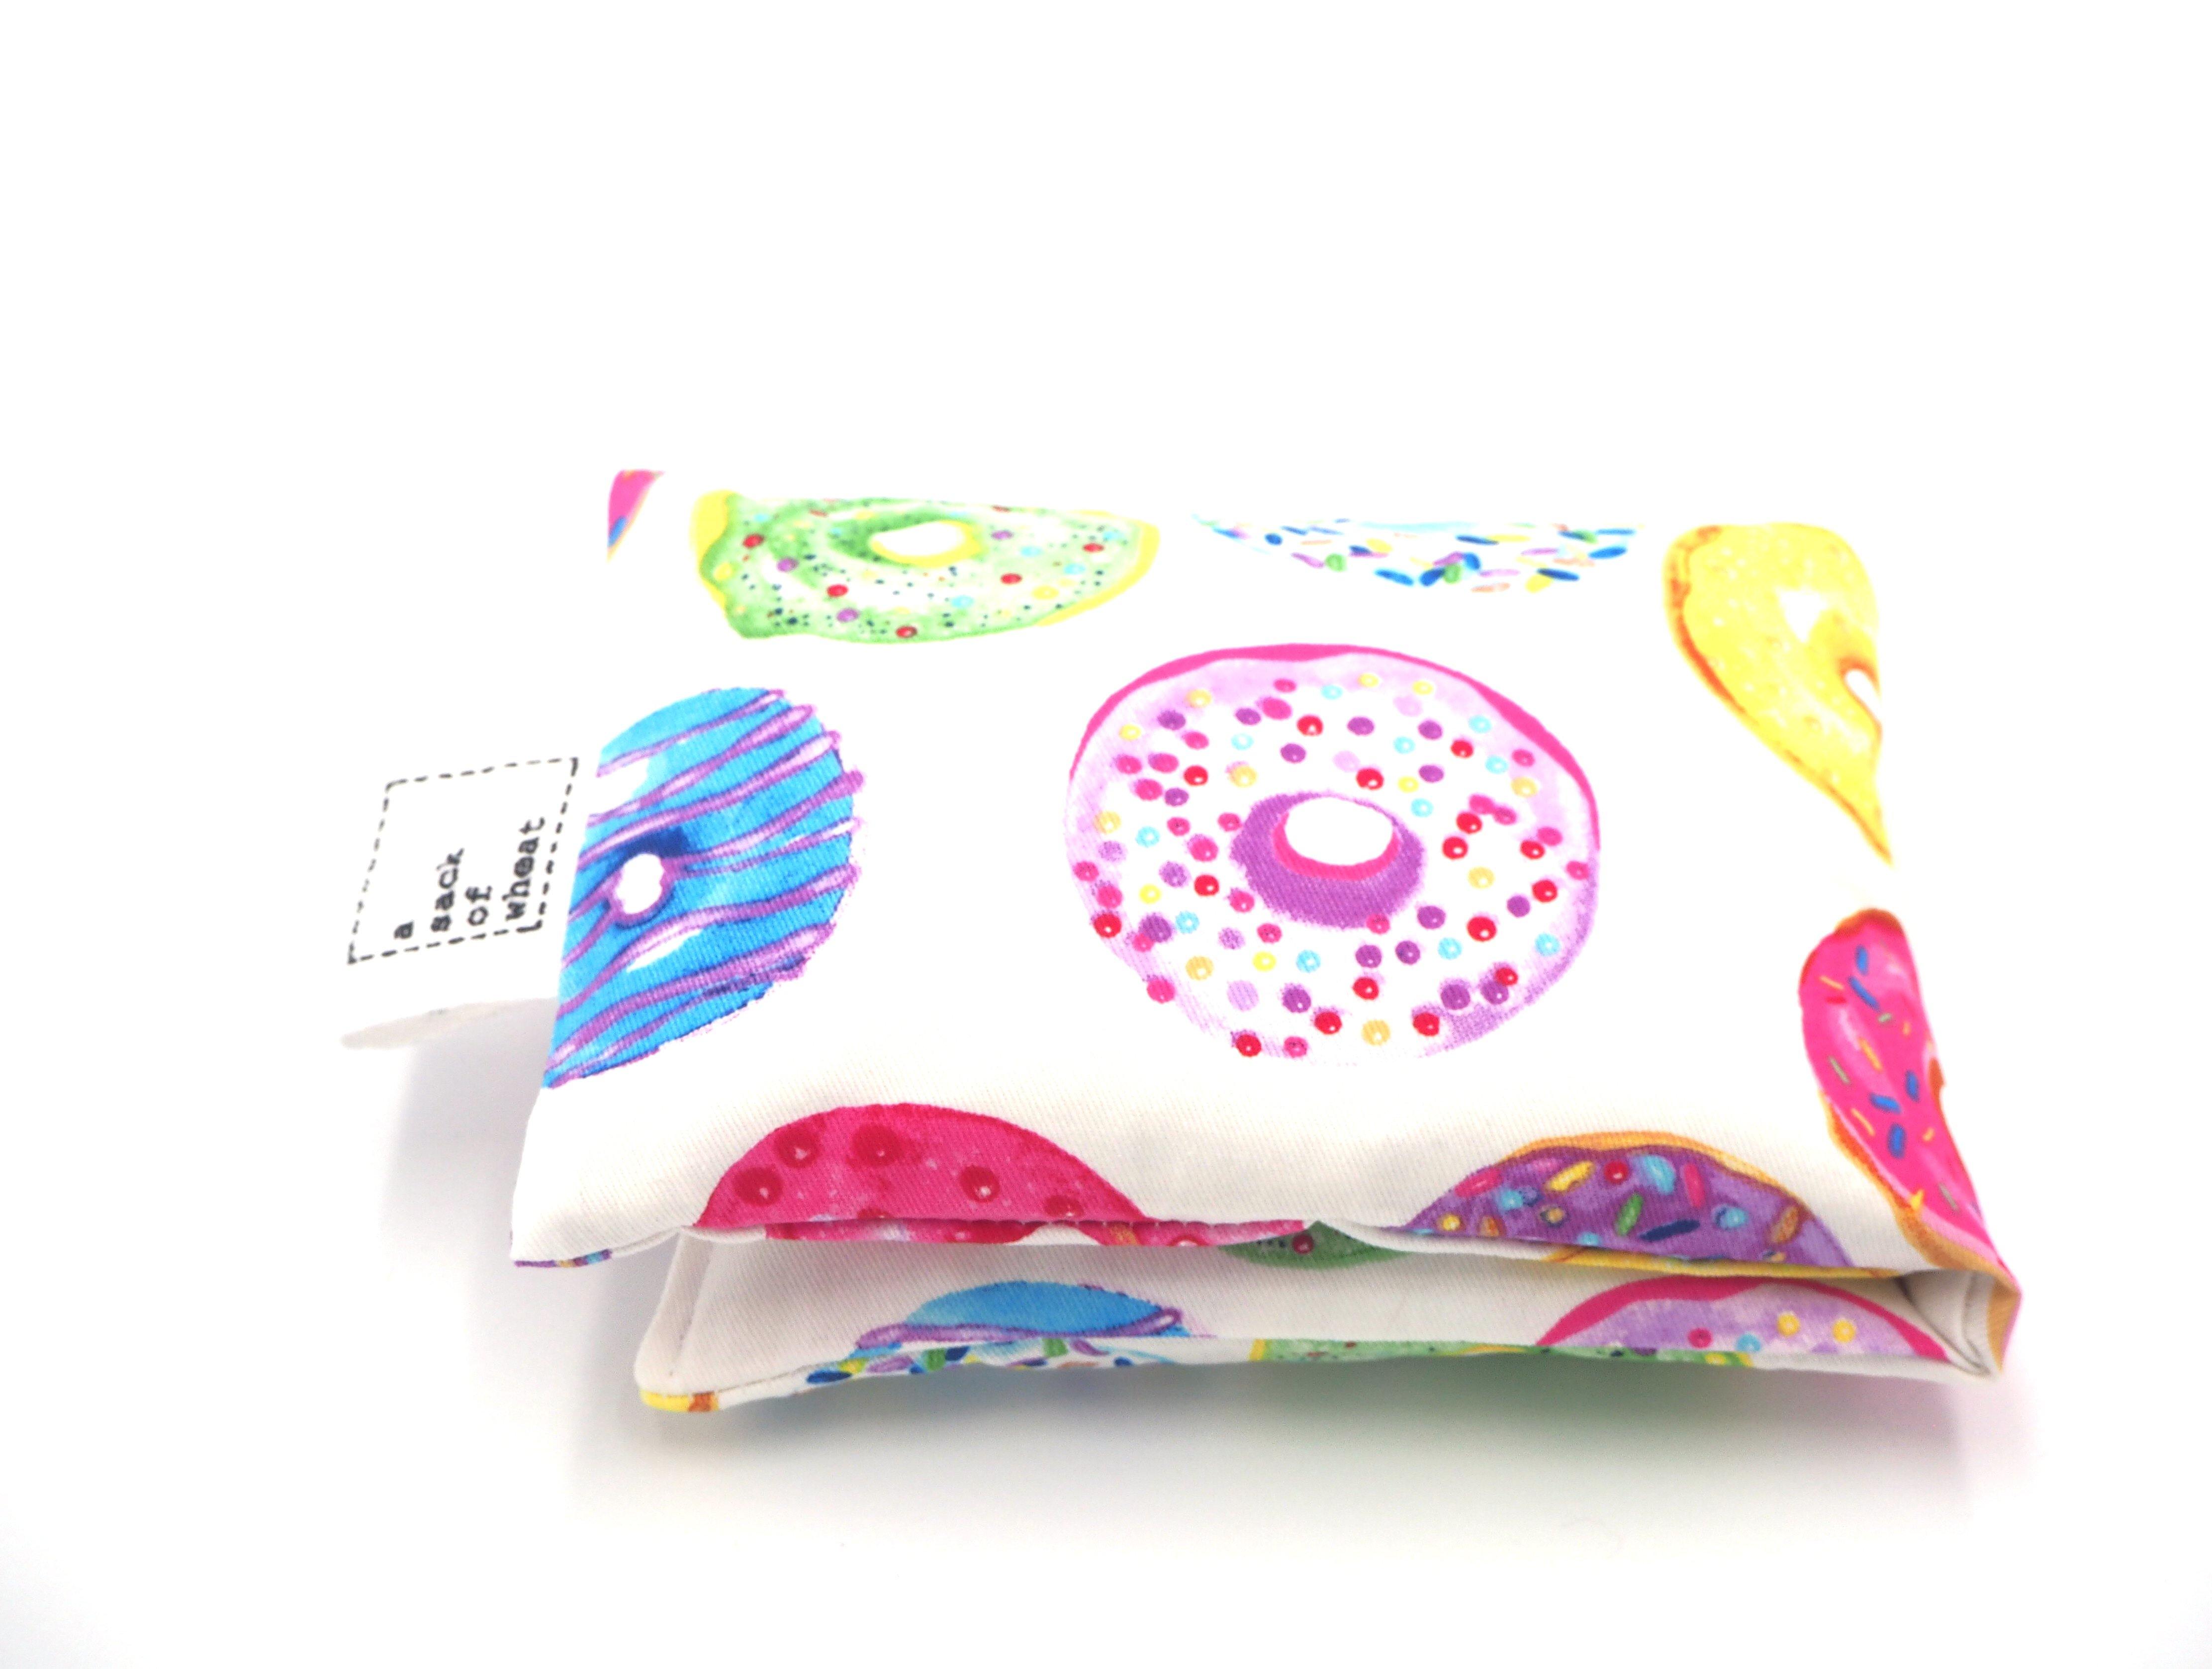 Folded view of A Sack Of Wheat, featuring delicious & colorful Donut images, 100% cotton fabric